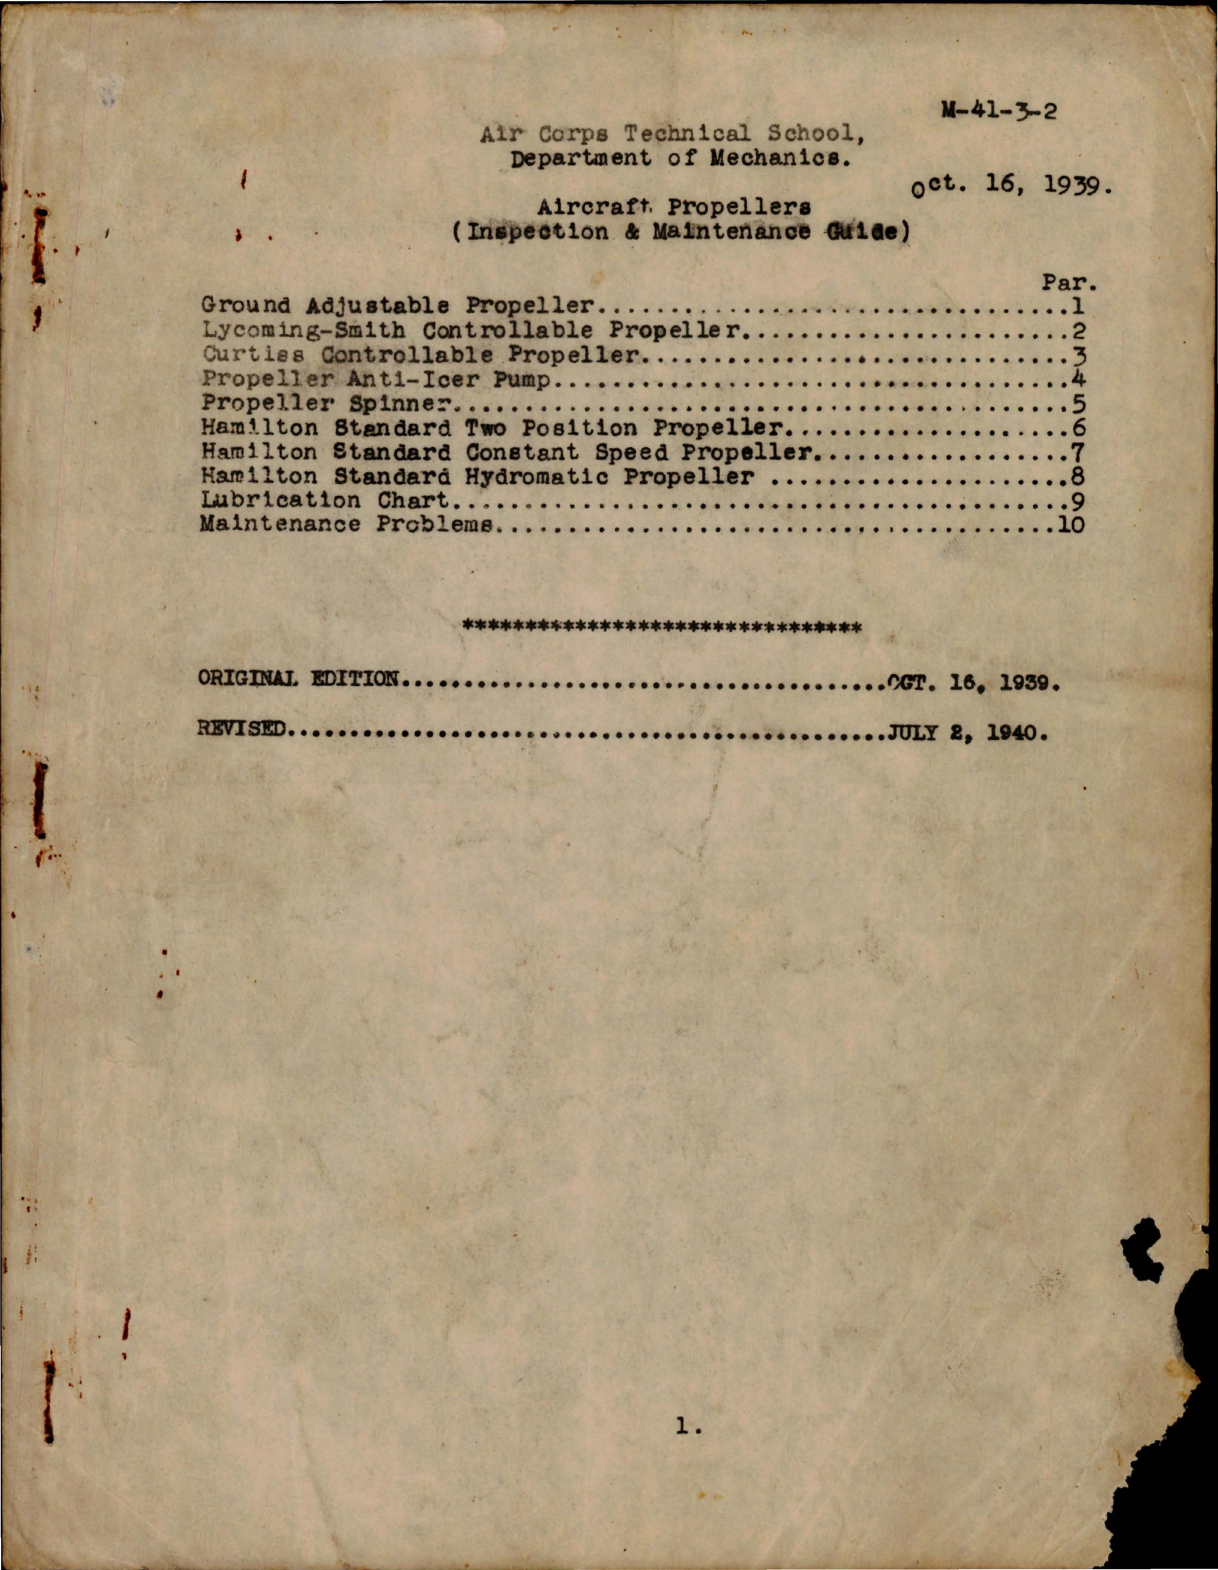 Sample page 1 from AirCorps Library document: Inspection and Maintenance Guide for Aircraft Propellers